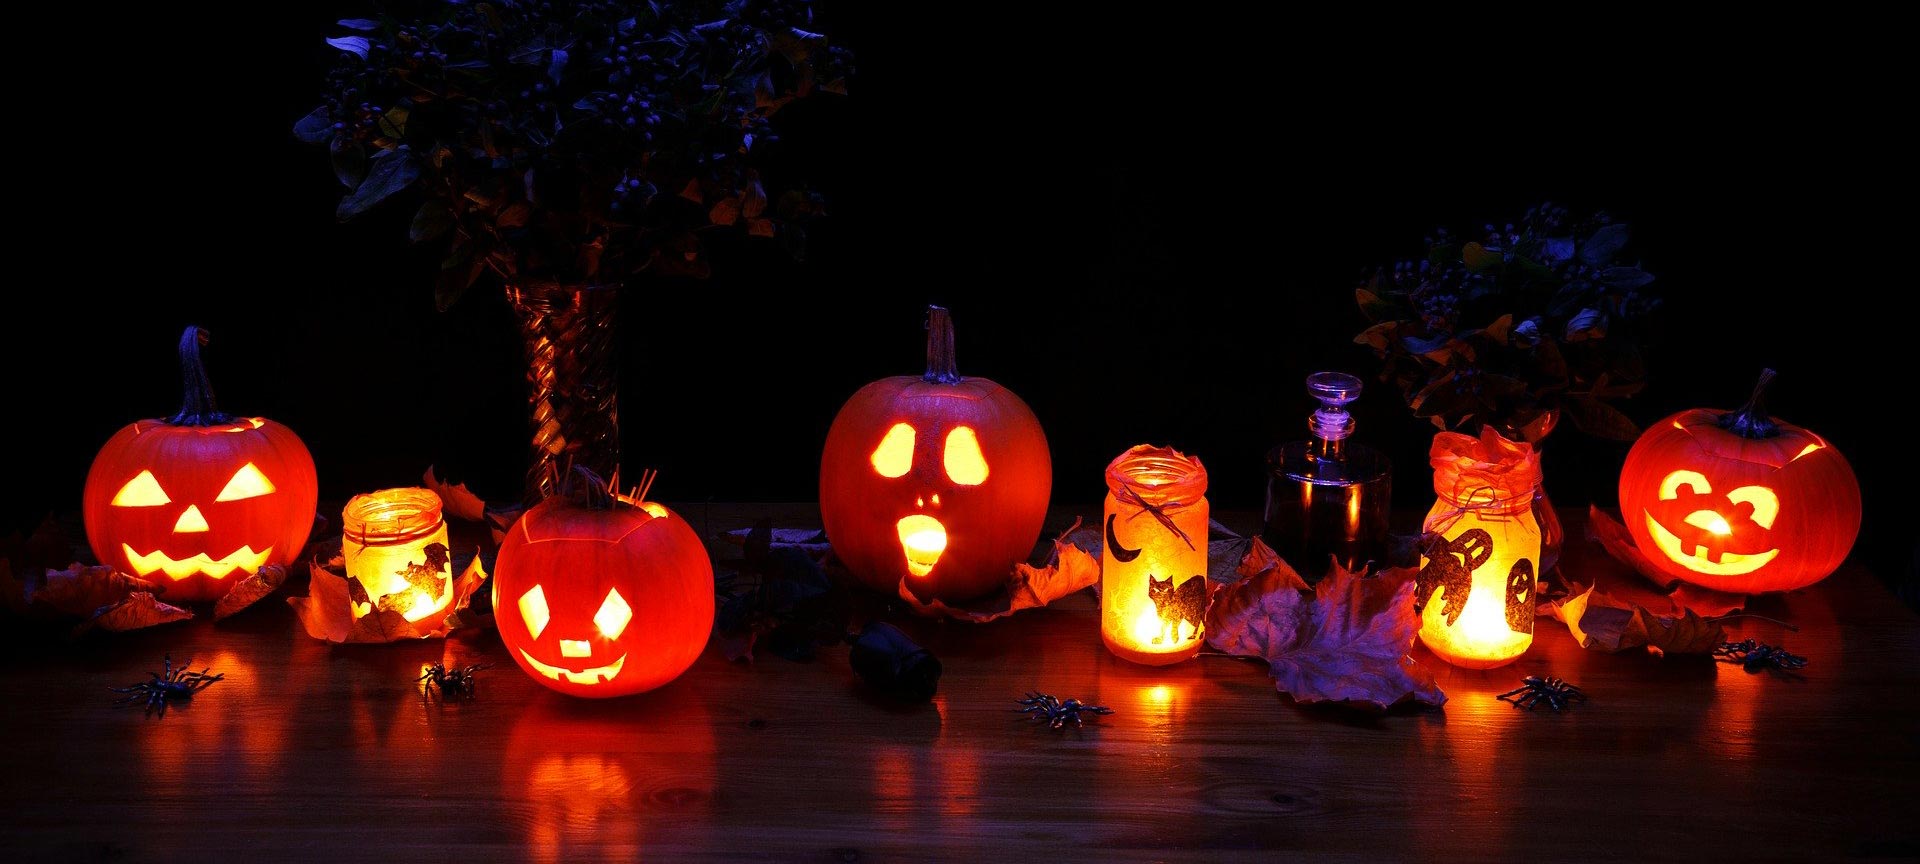 Pumpkin Patch: Ideas for pumpkin carving, decorating and eating!